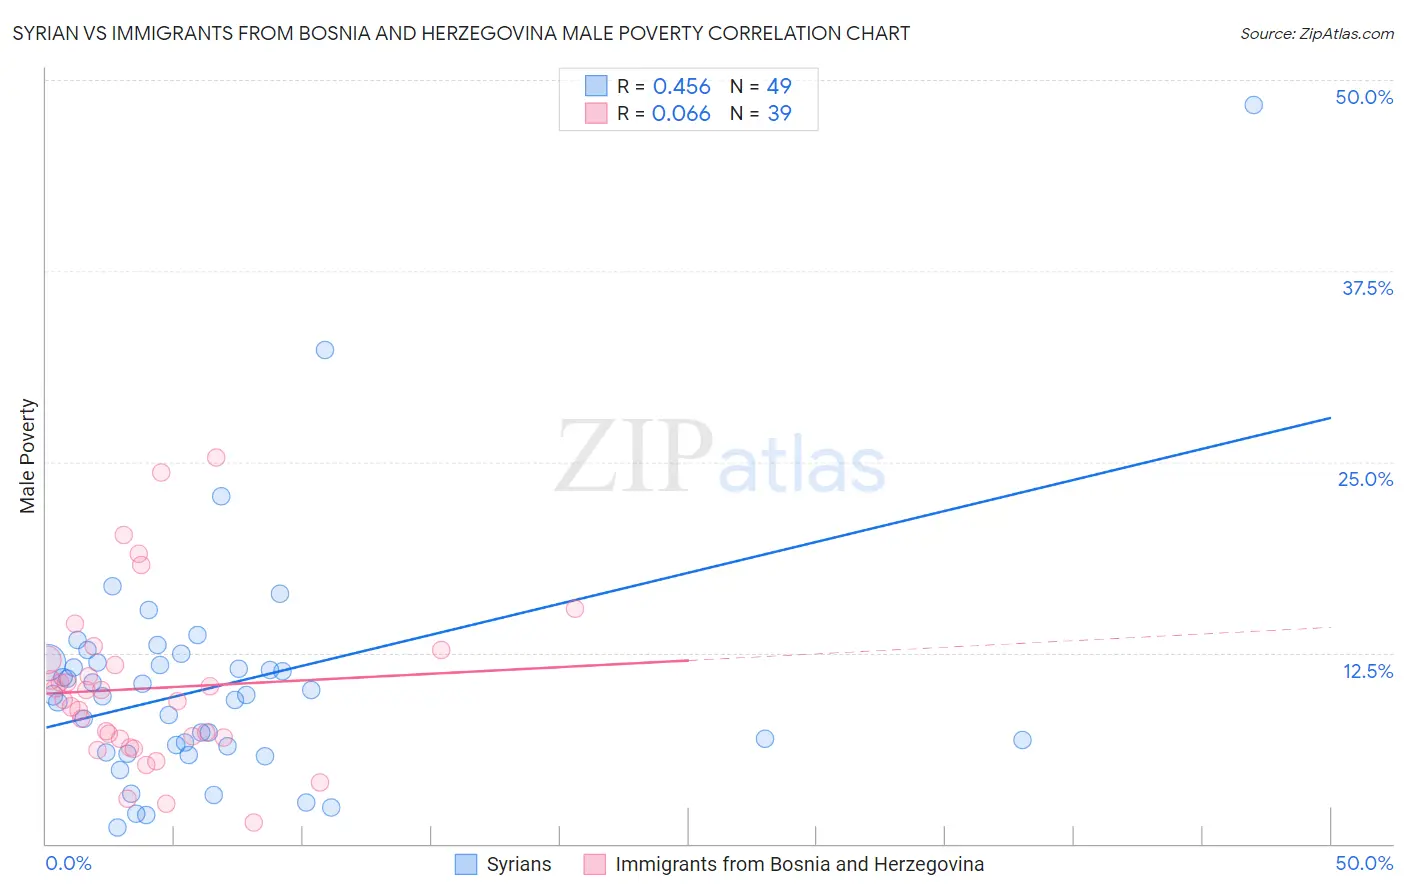 Syrian vs Immigrants from Bosnia and Herzegovina Male Poverty